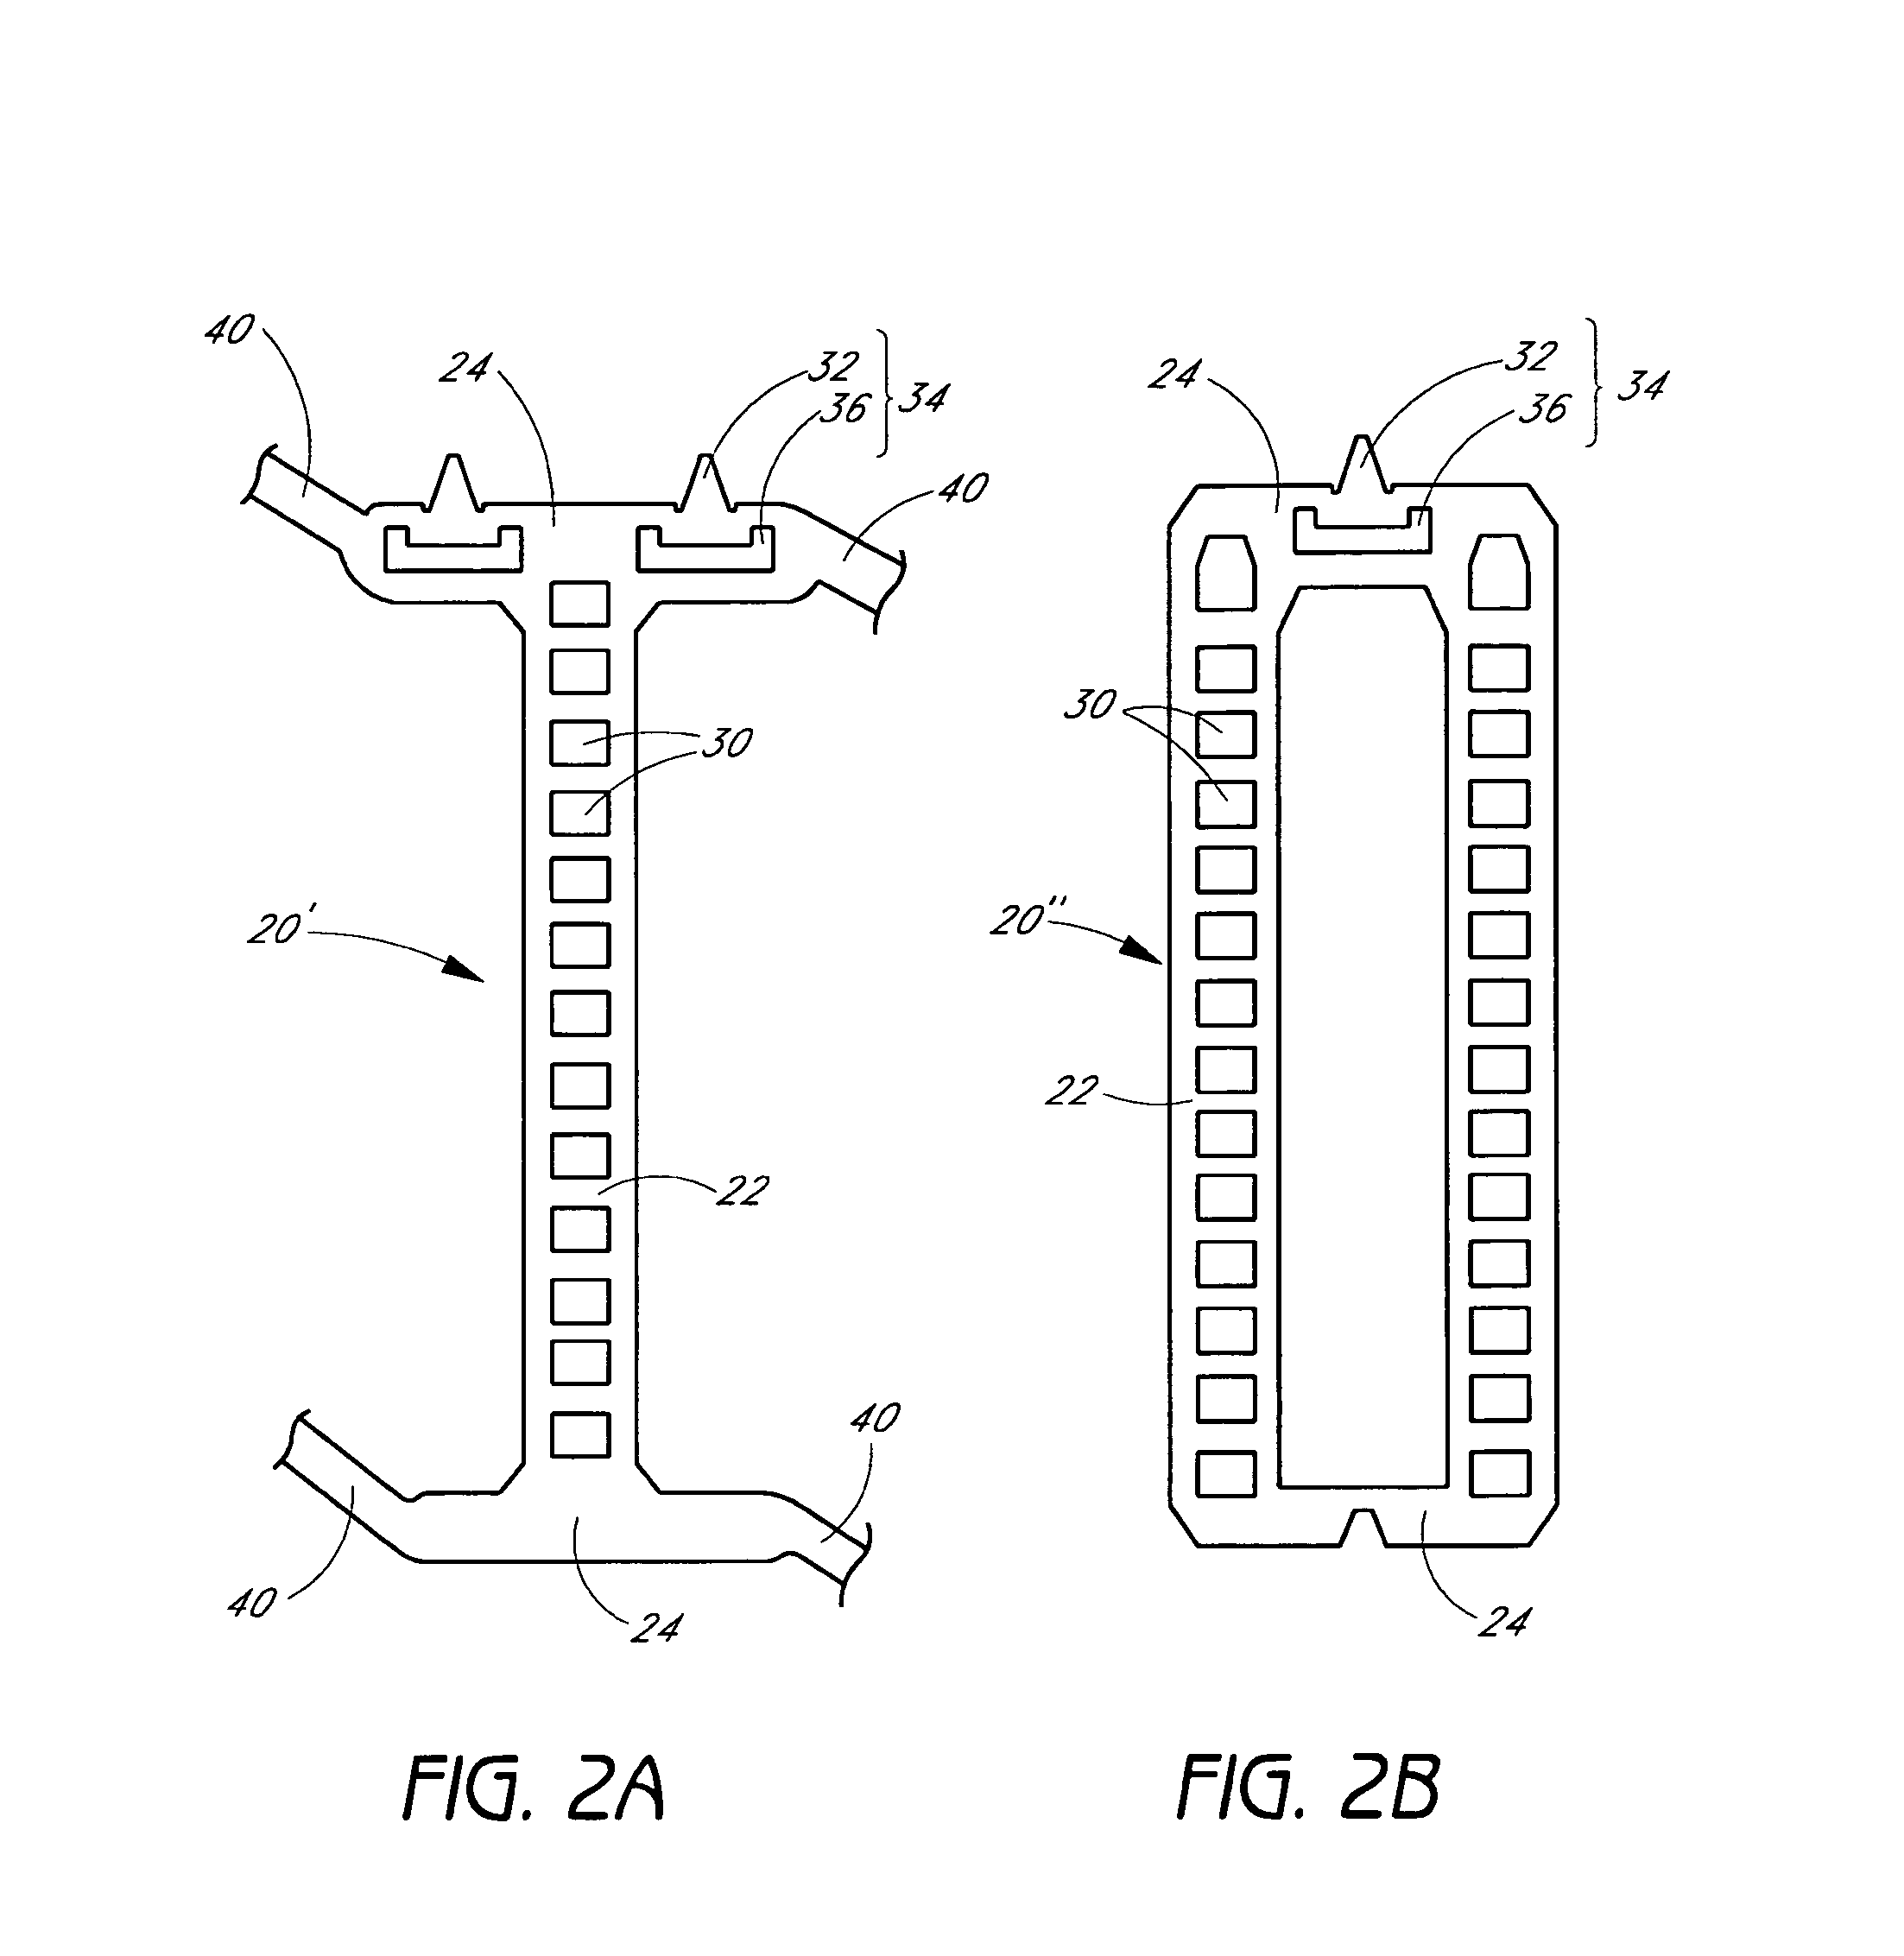 Expandable stent with sliding and locking radial elements